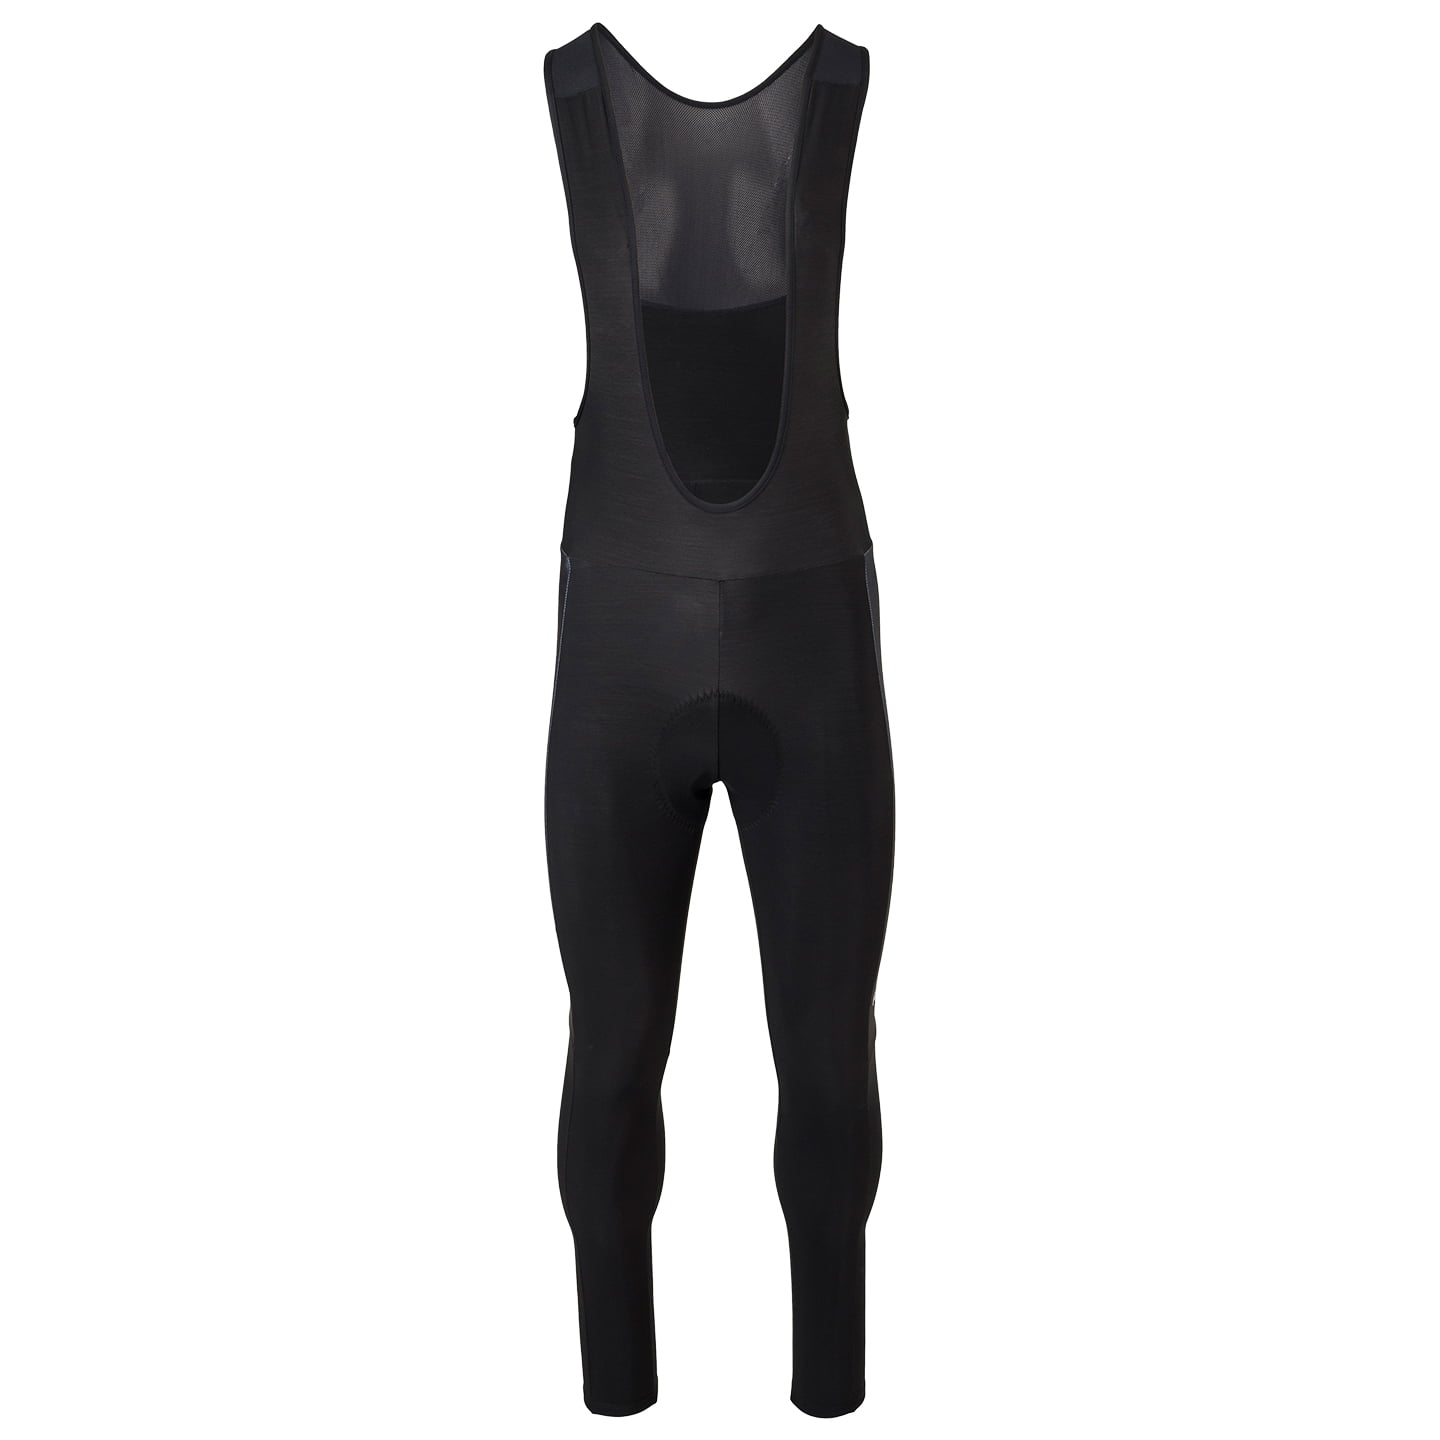 TEAM VISMA-LEASE A BIKE 2024 Bib Tights, for men, size S, Cycle tights, Cycling clothing